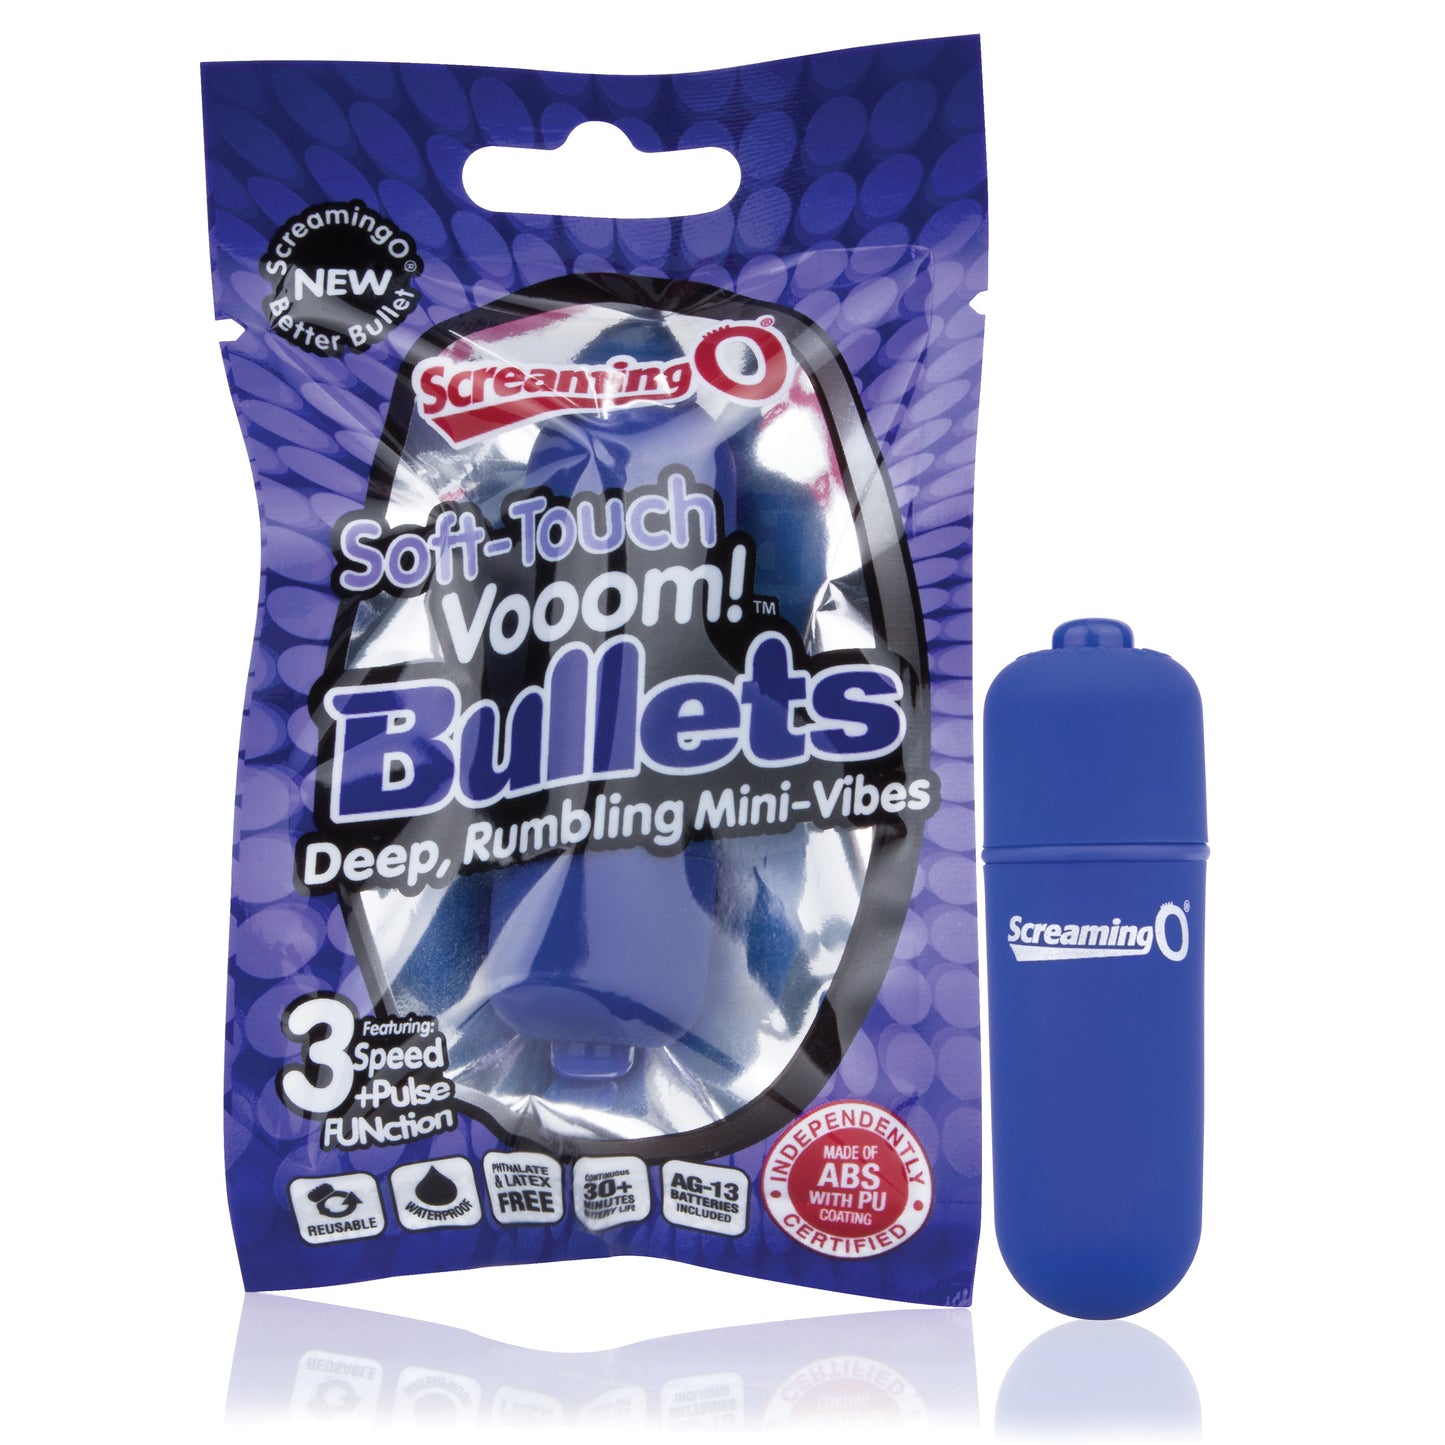 Soft-Touch Vooom! Bullets - Blue